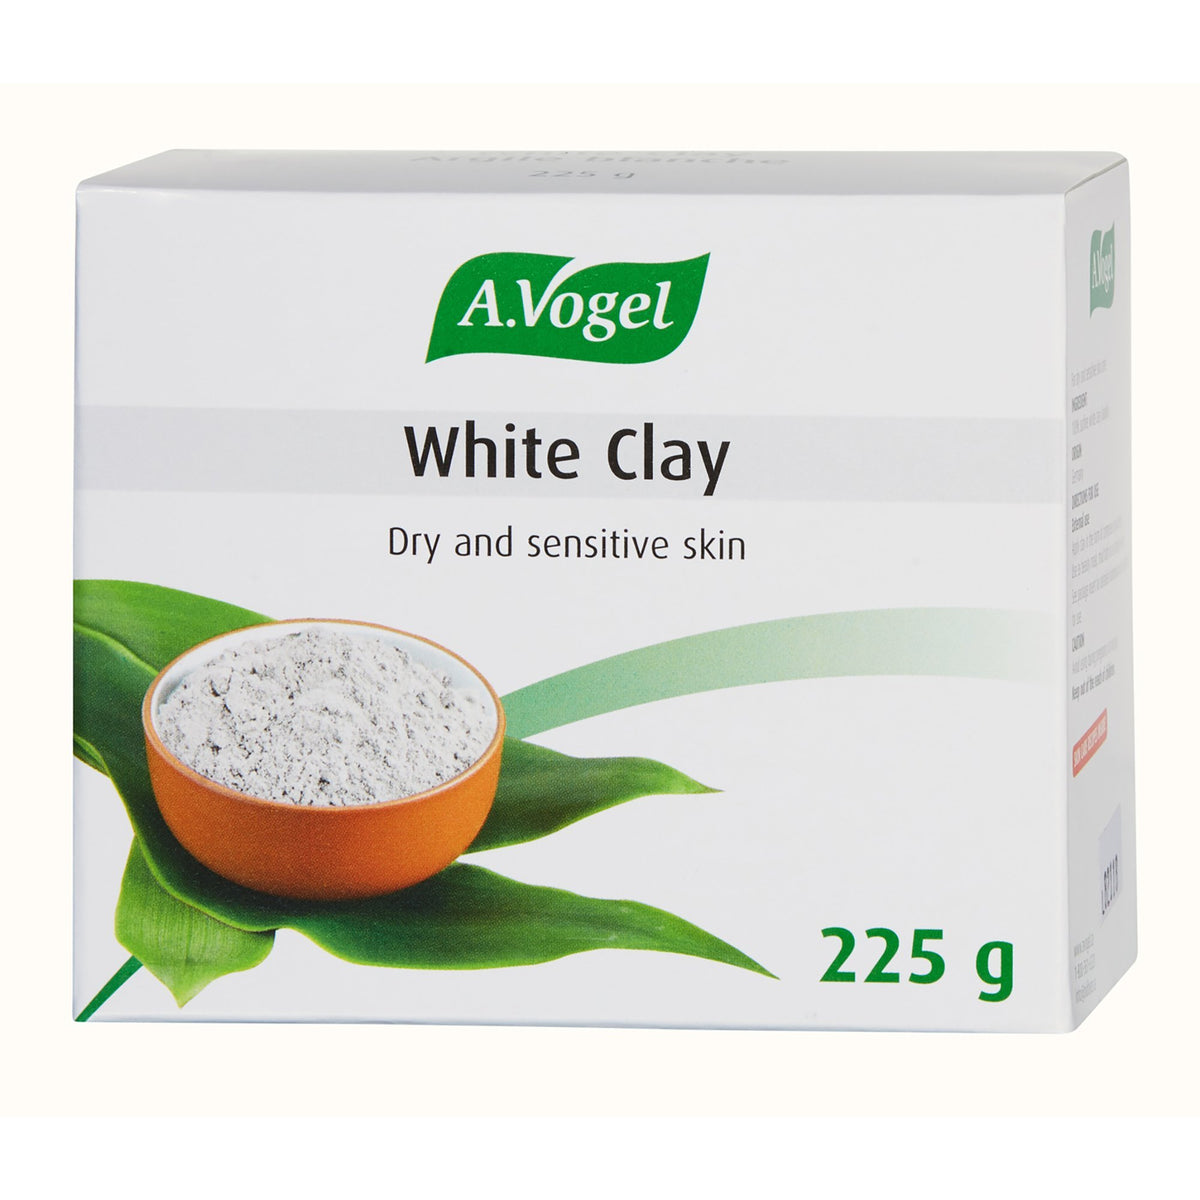 White Clay - Used for clay mask, white clay is ideal for sensitive and dry skin - A.Vogel Canada